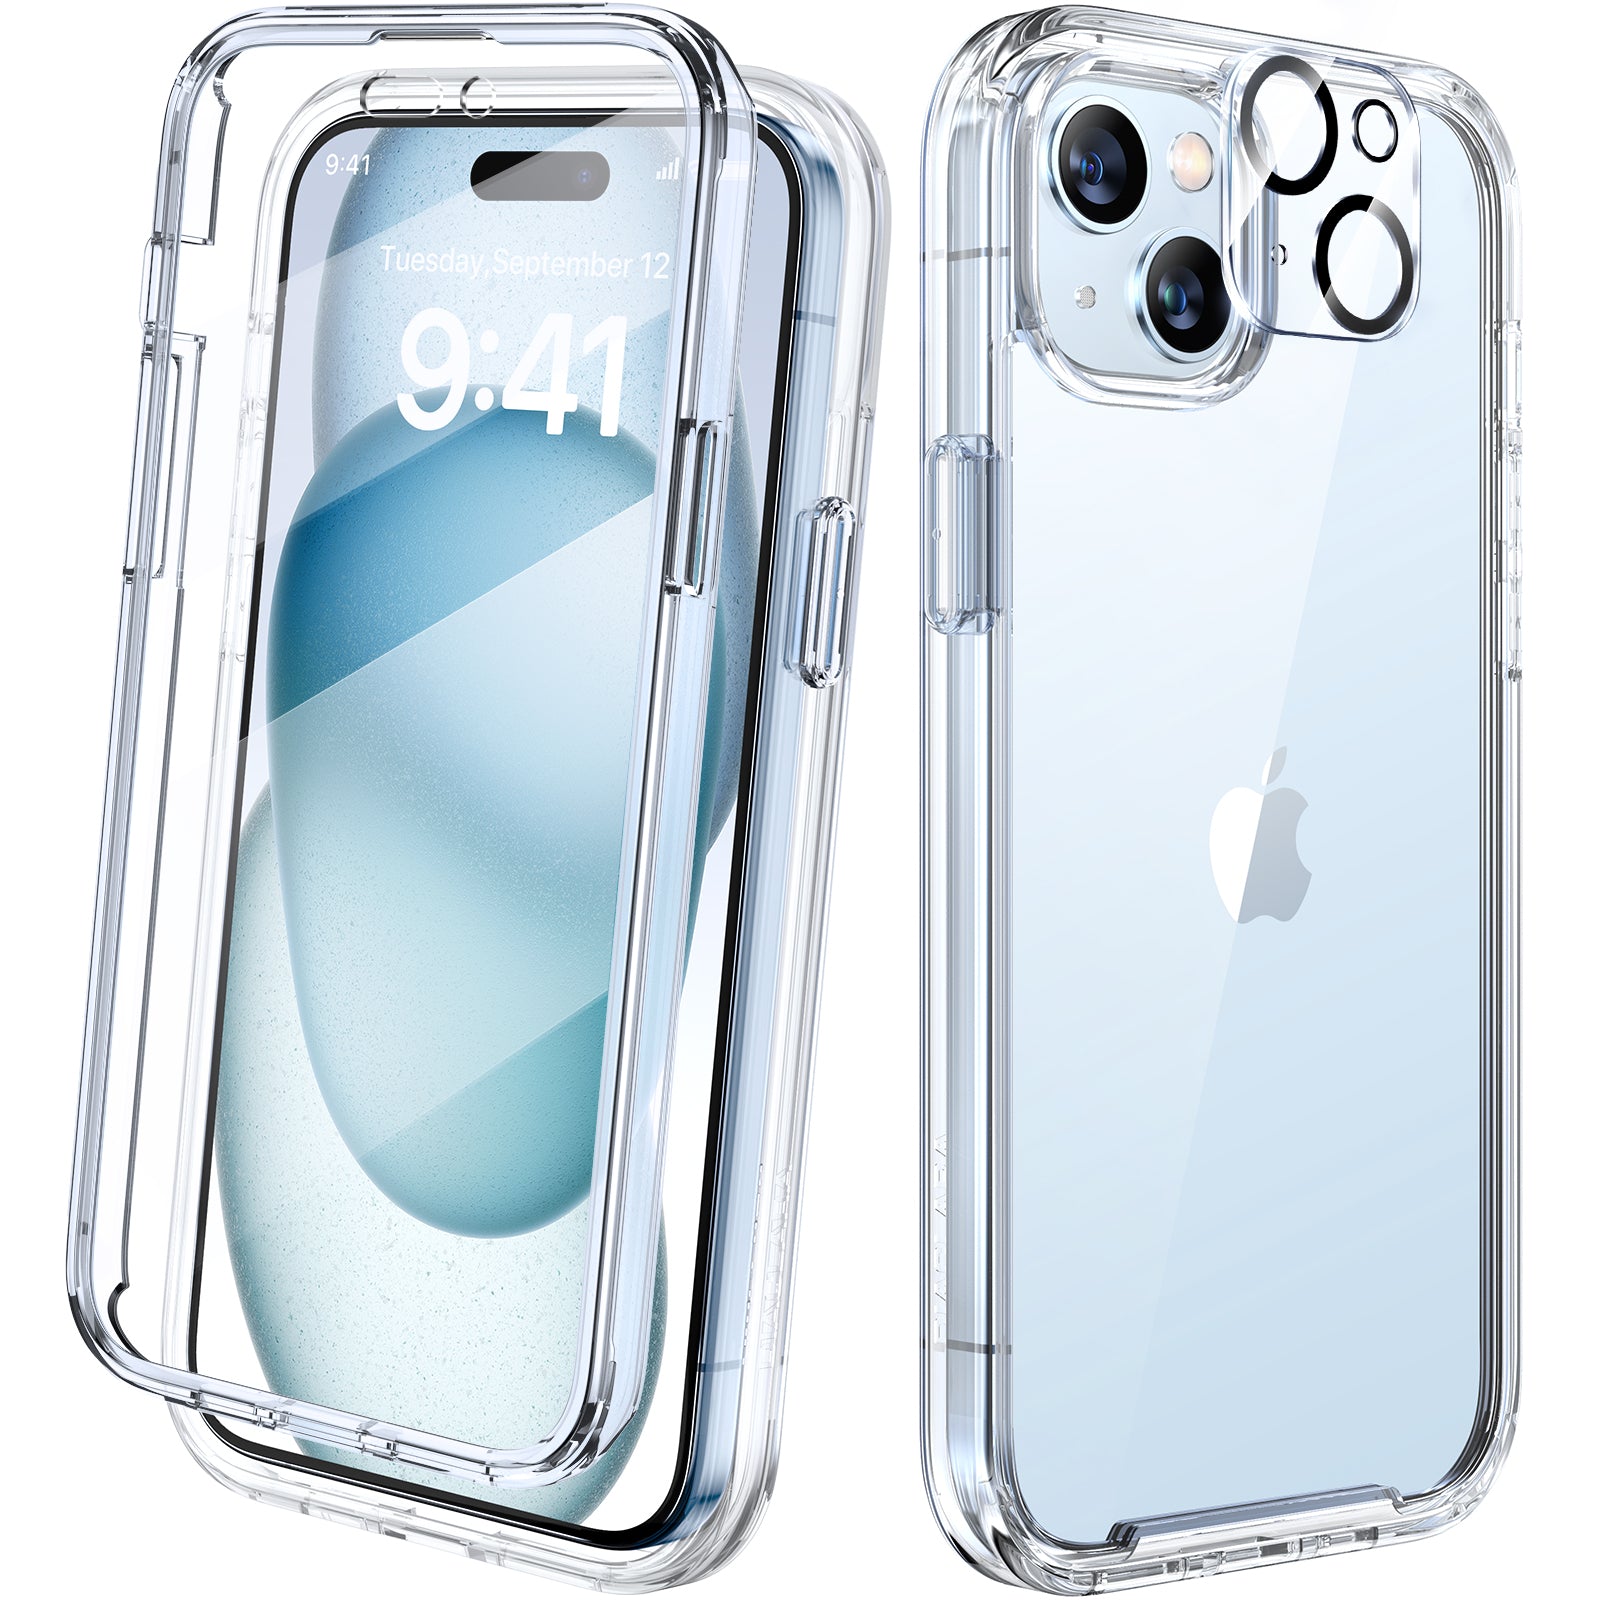  Diaclara Compatible with iPhone 11 Pro Max Case, with